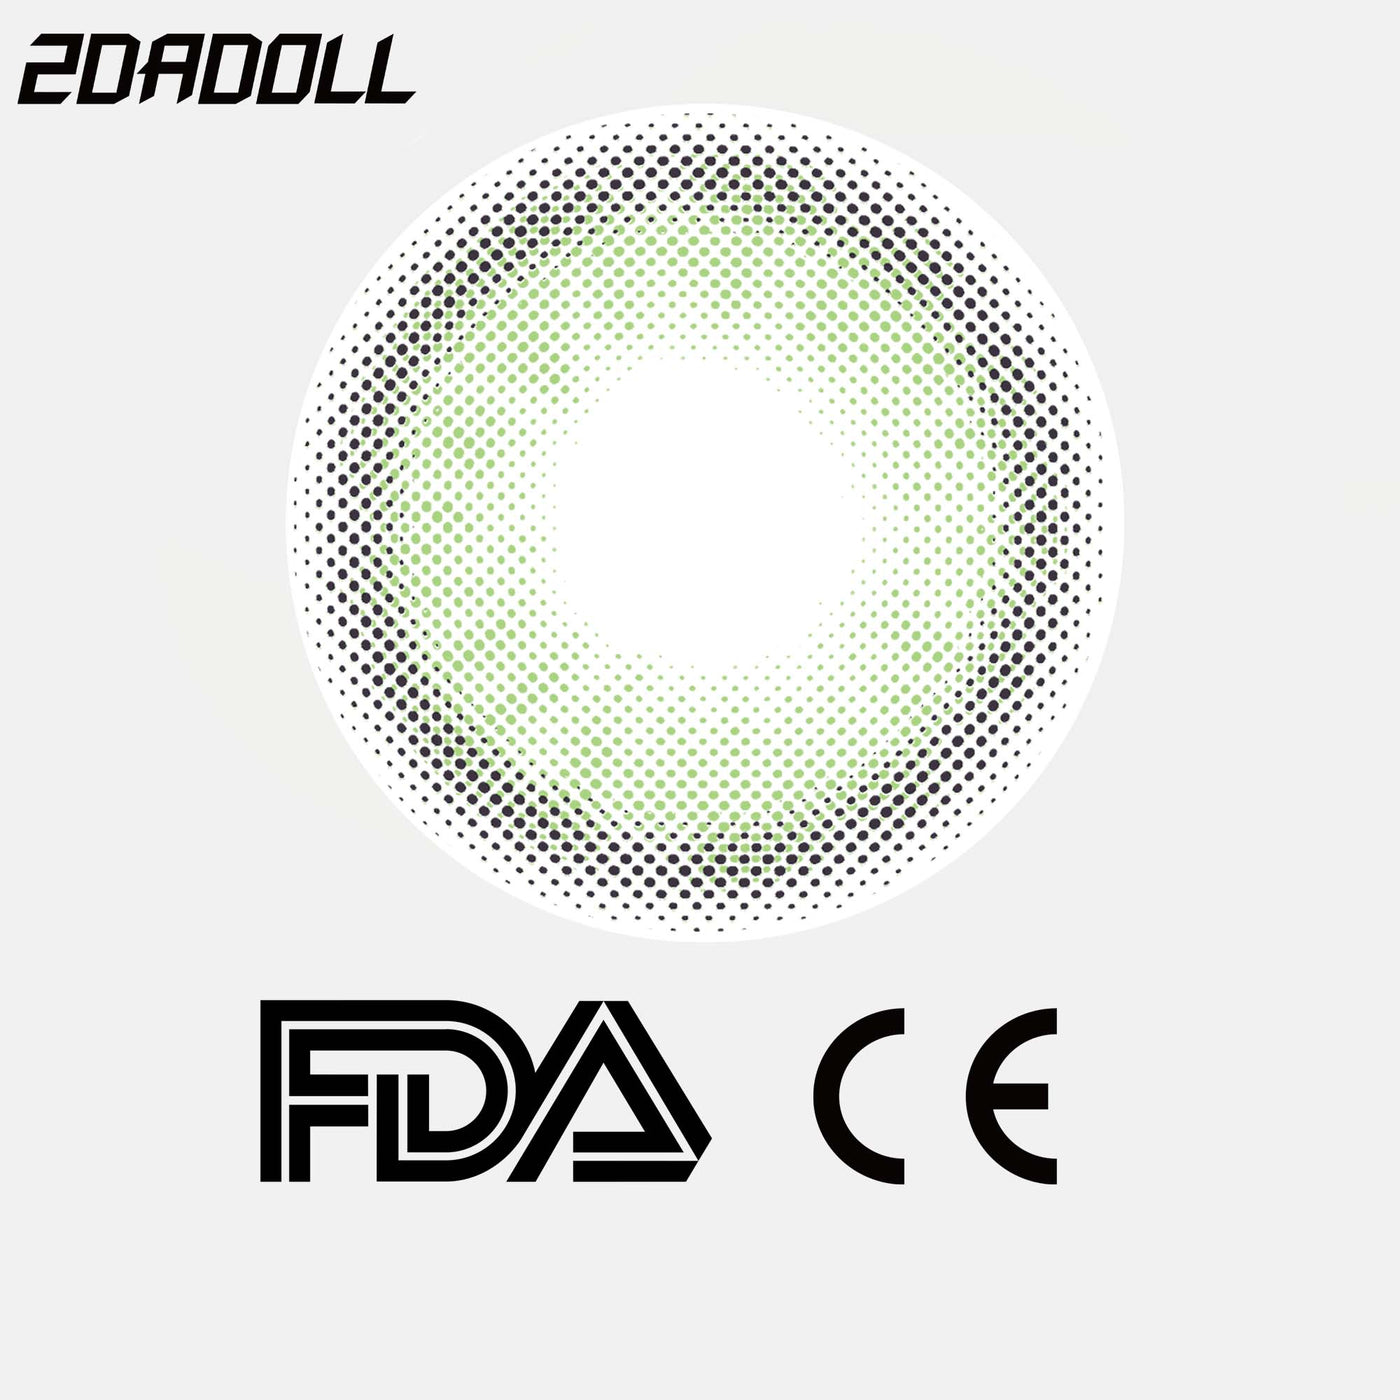 2Dadoll coko green Contact Lenses(1 pair/6 months)